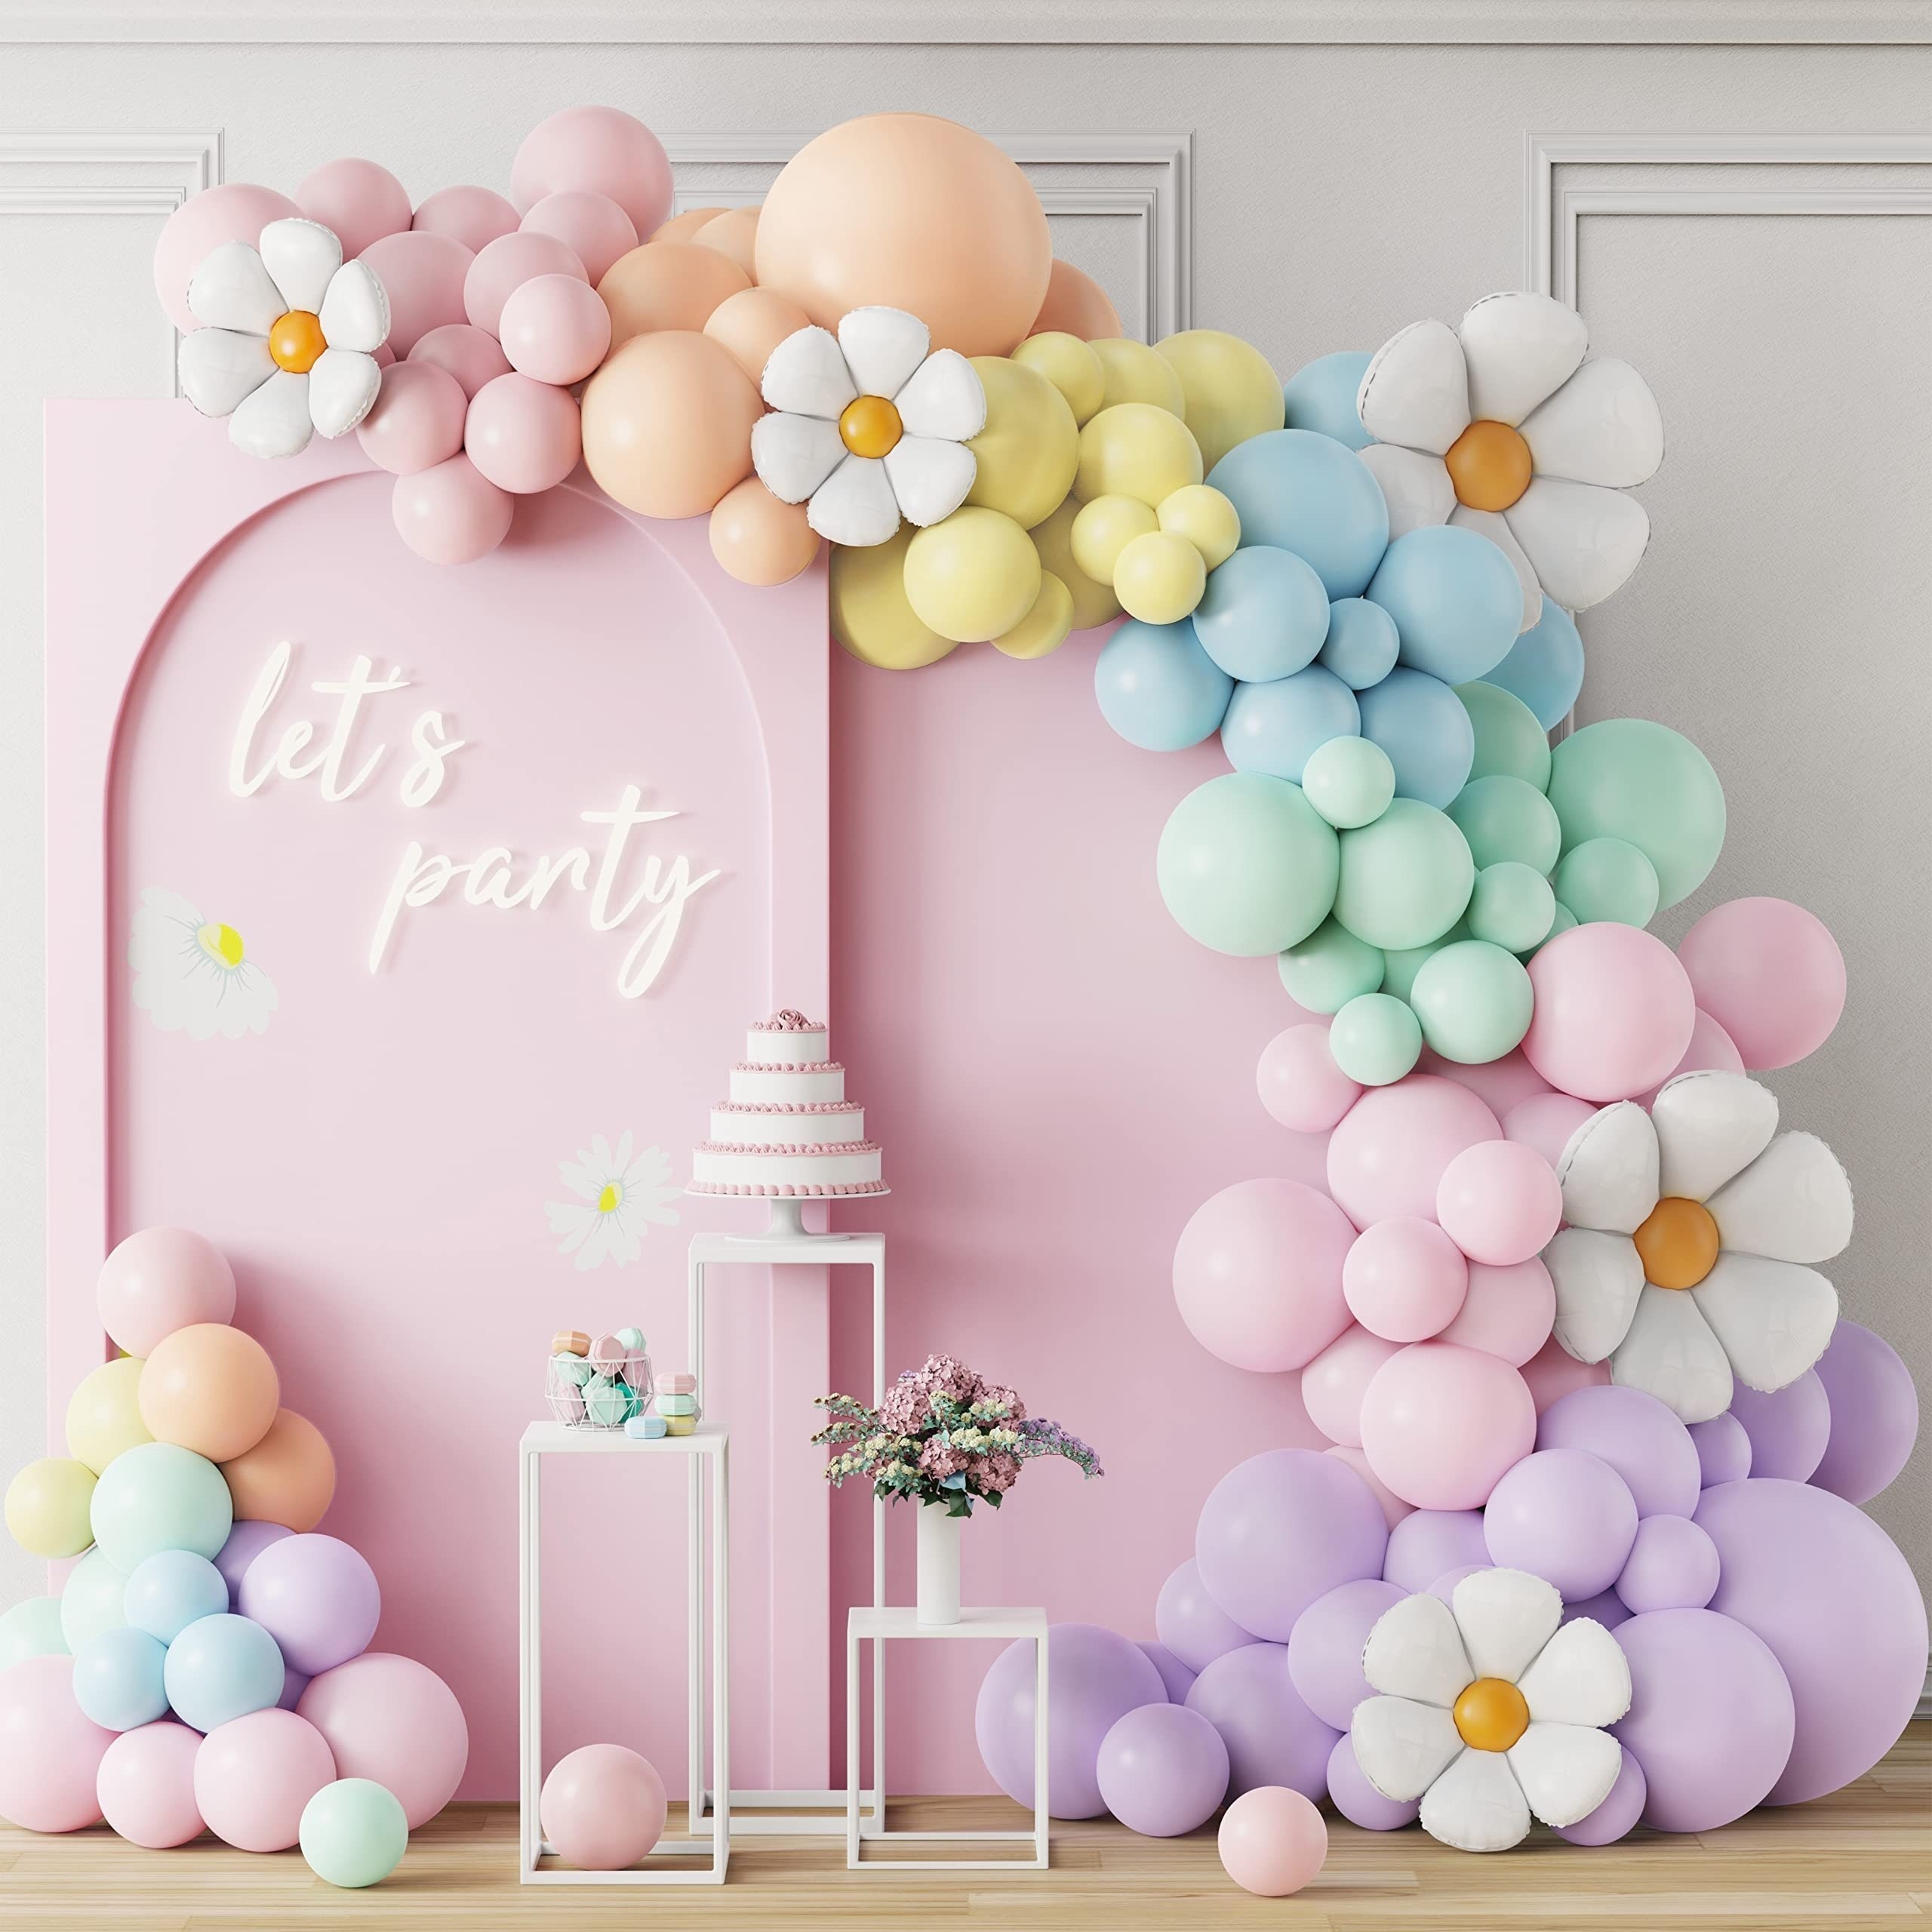 120pcs Pink Orange Balloon Garland, Daisy Balloon Arch with Metallic Gold  Color Party Flower Balloons For Birthday Baby Shower Wedding Groovy Theme  Decorations